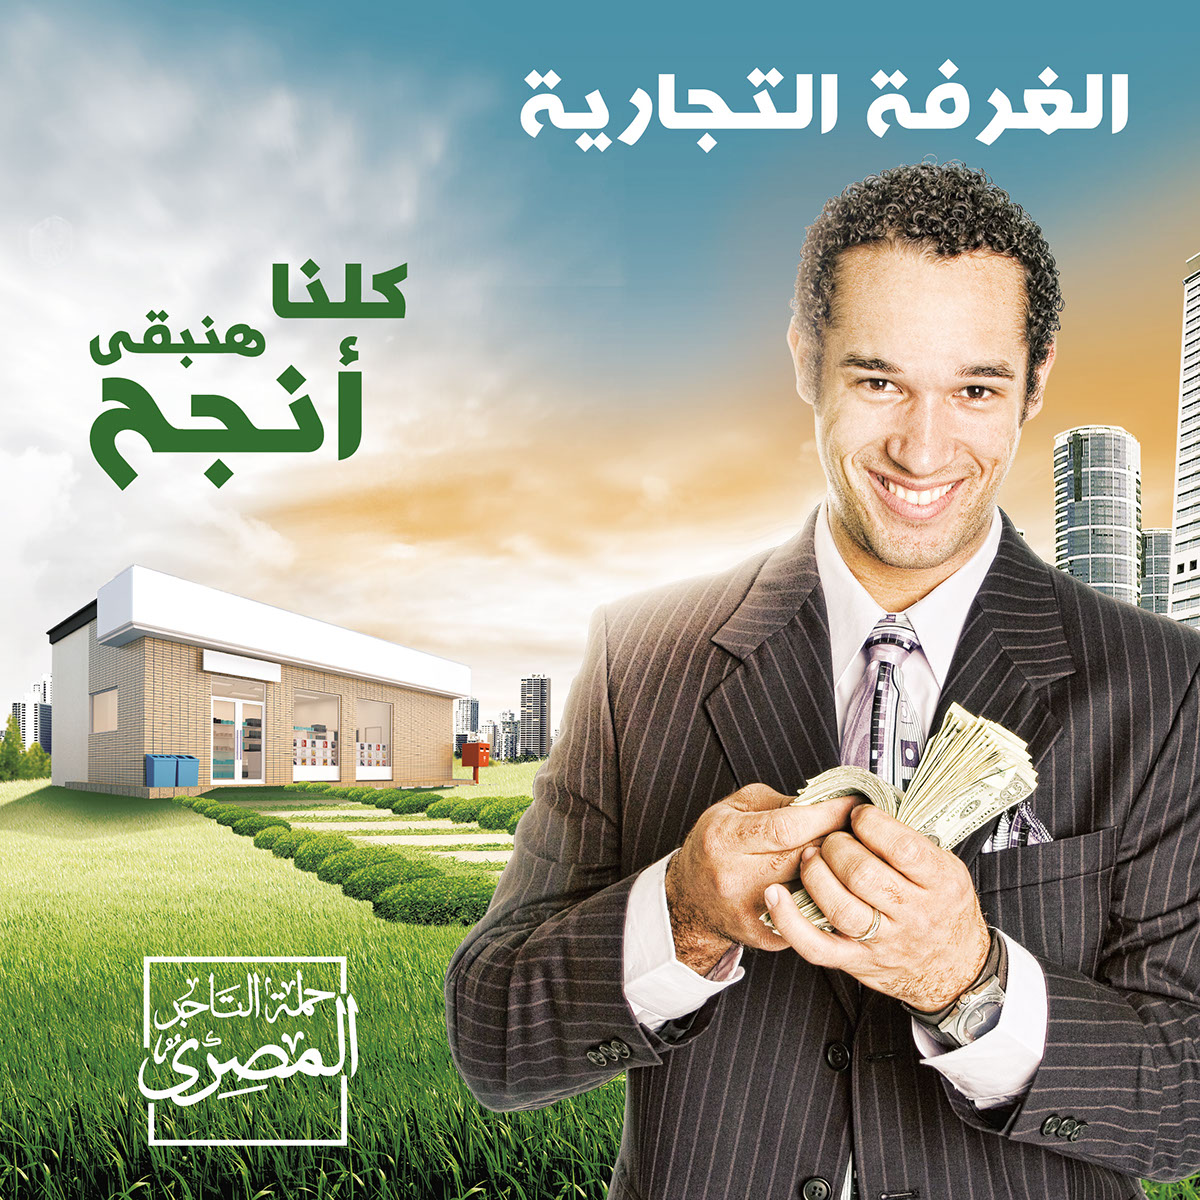 egypt alexandria ramy commercial creative concept portrait Creative Retouching money success photographing campaign commerce Alexandria Chamber ramy mohamed